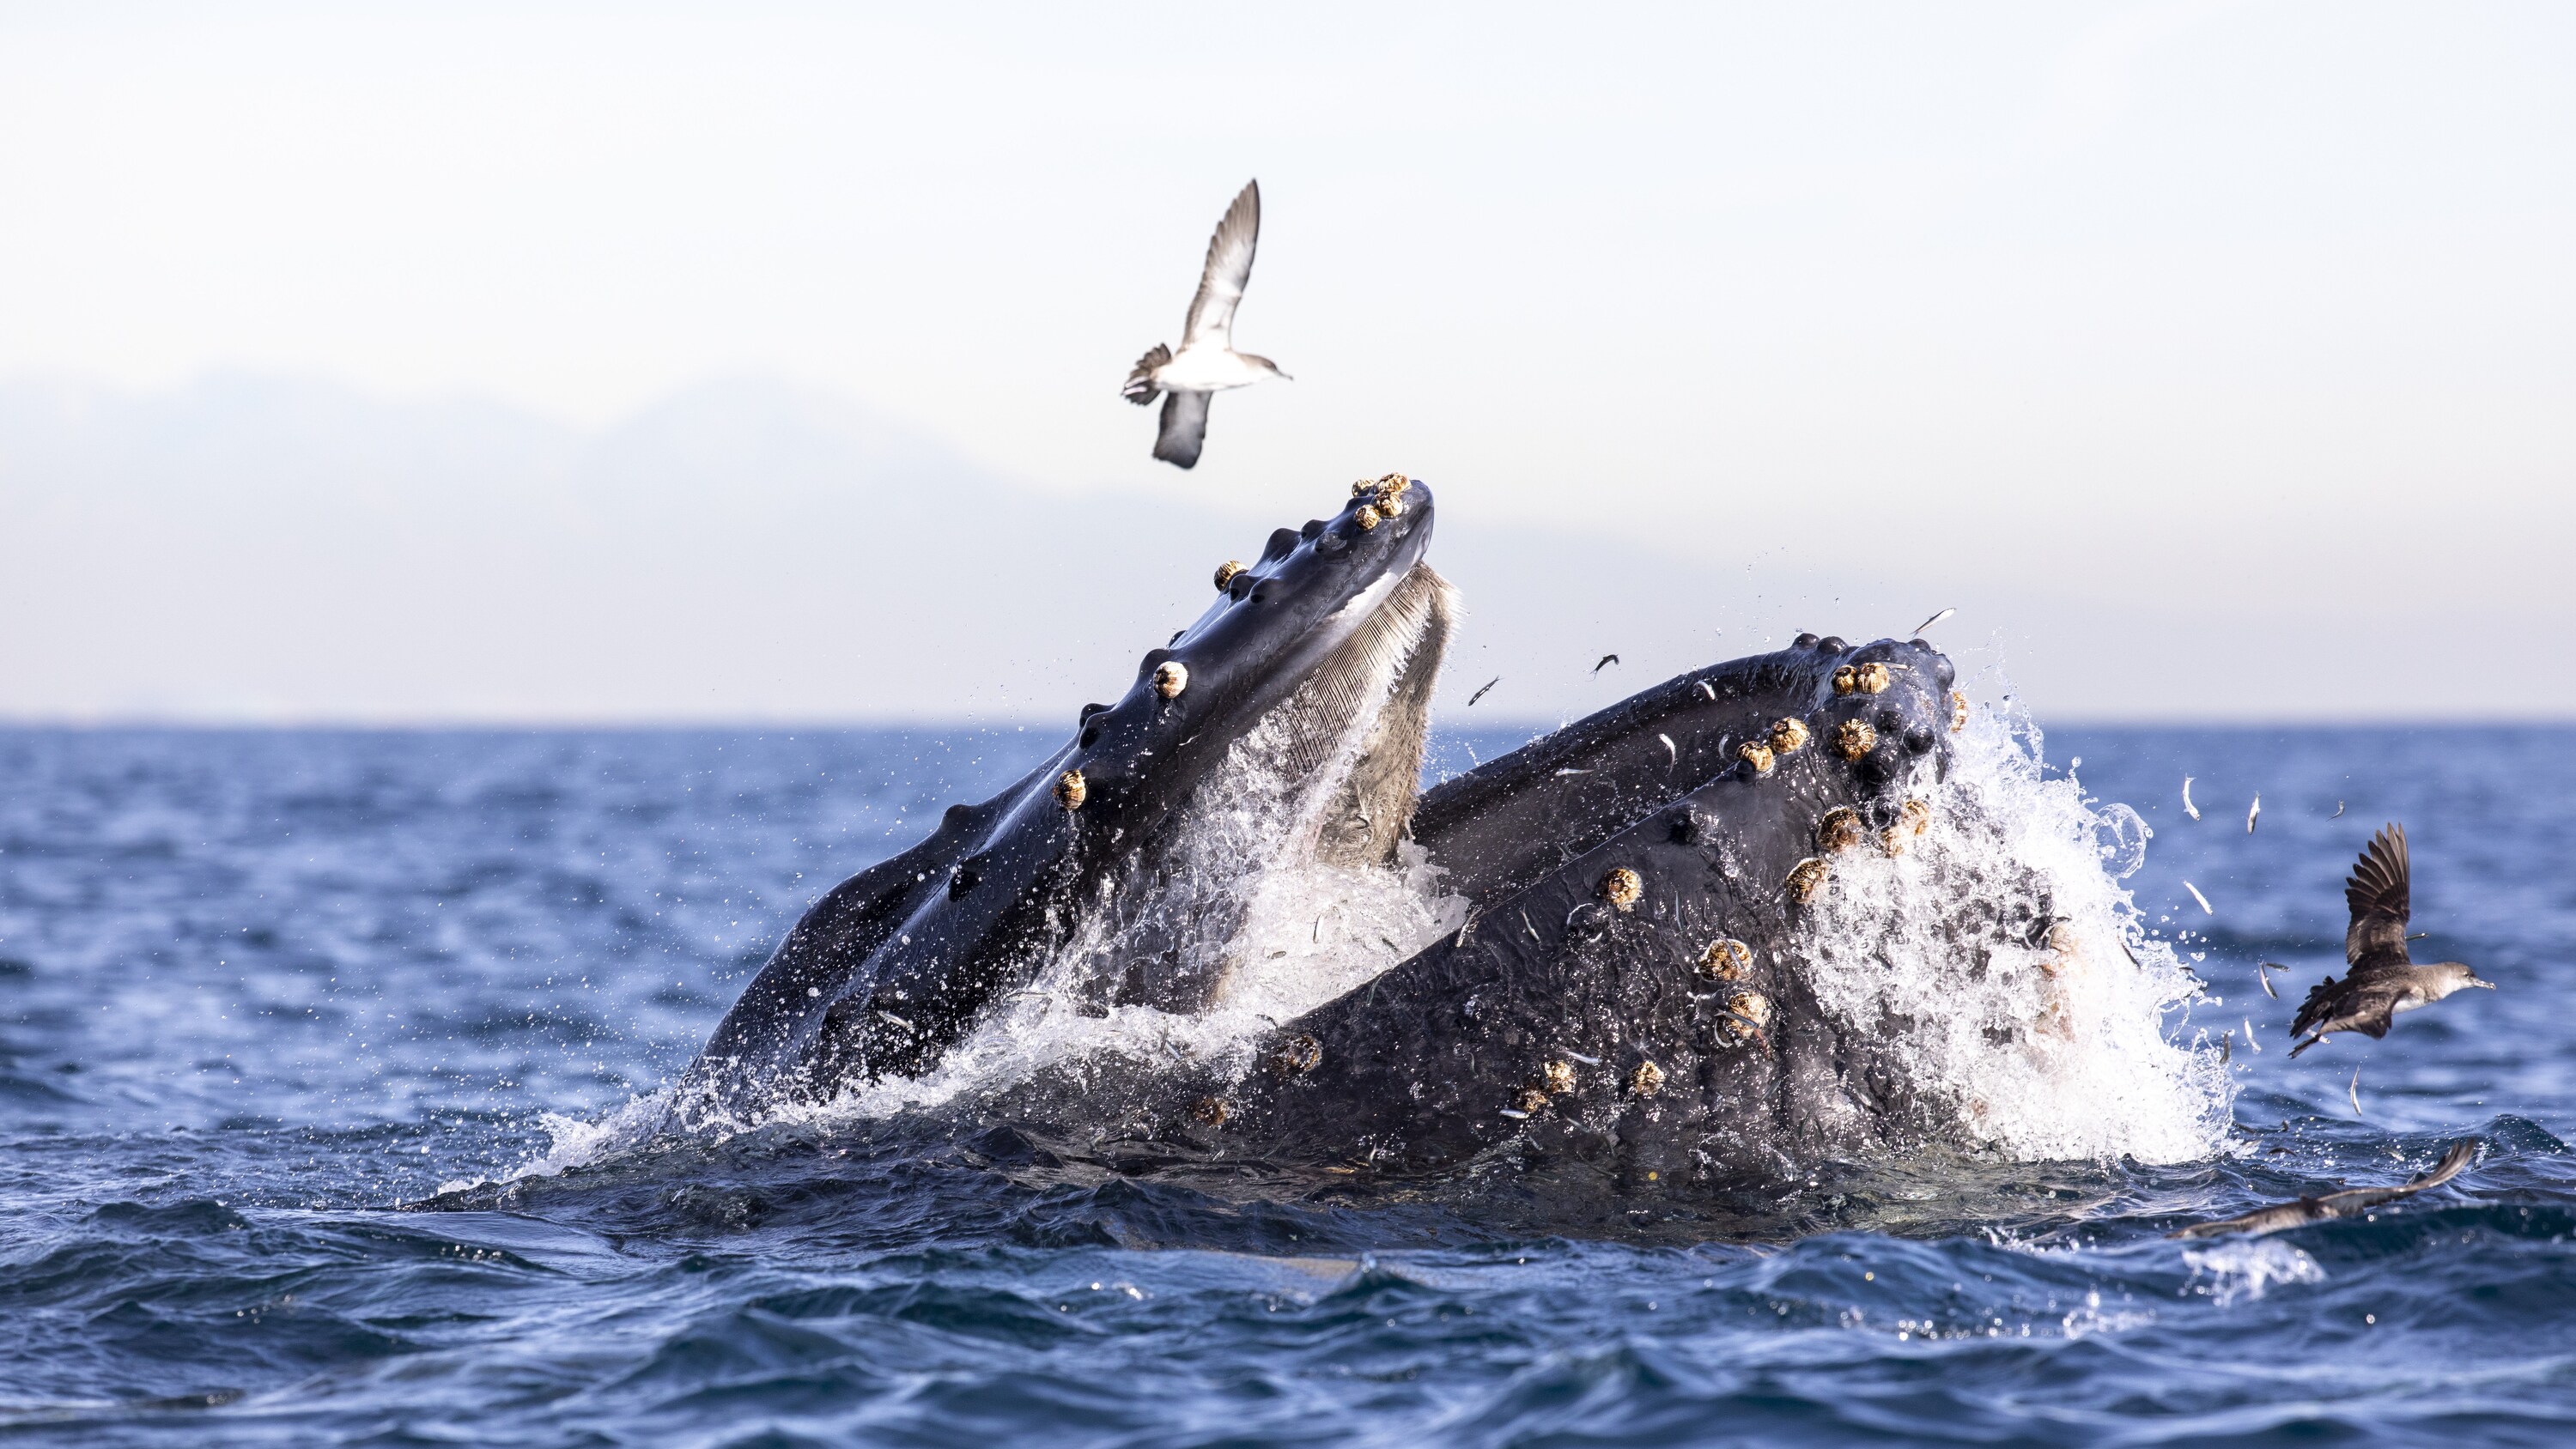 After dolphins, sea lions and sea birds have all eaten their fill of an anchovy bait ball, a humpback whale arrives late to the party. (National Geographic for Disney+/Ryan Lawler)